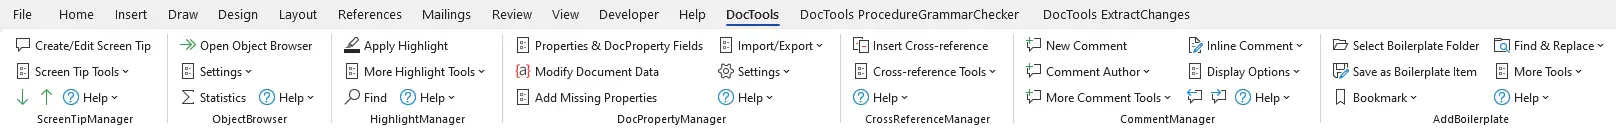 Productivity tools for Word – DocTools tabs in the Ribbon with tools from many Word add-ins